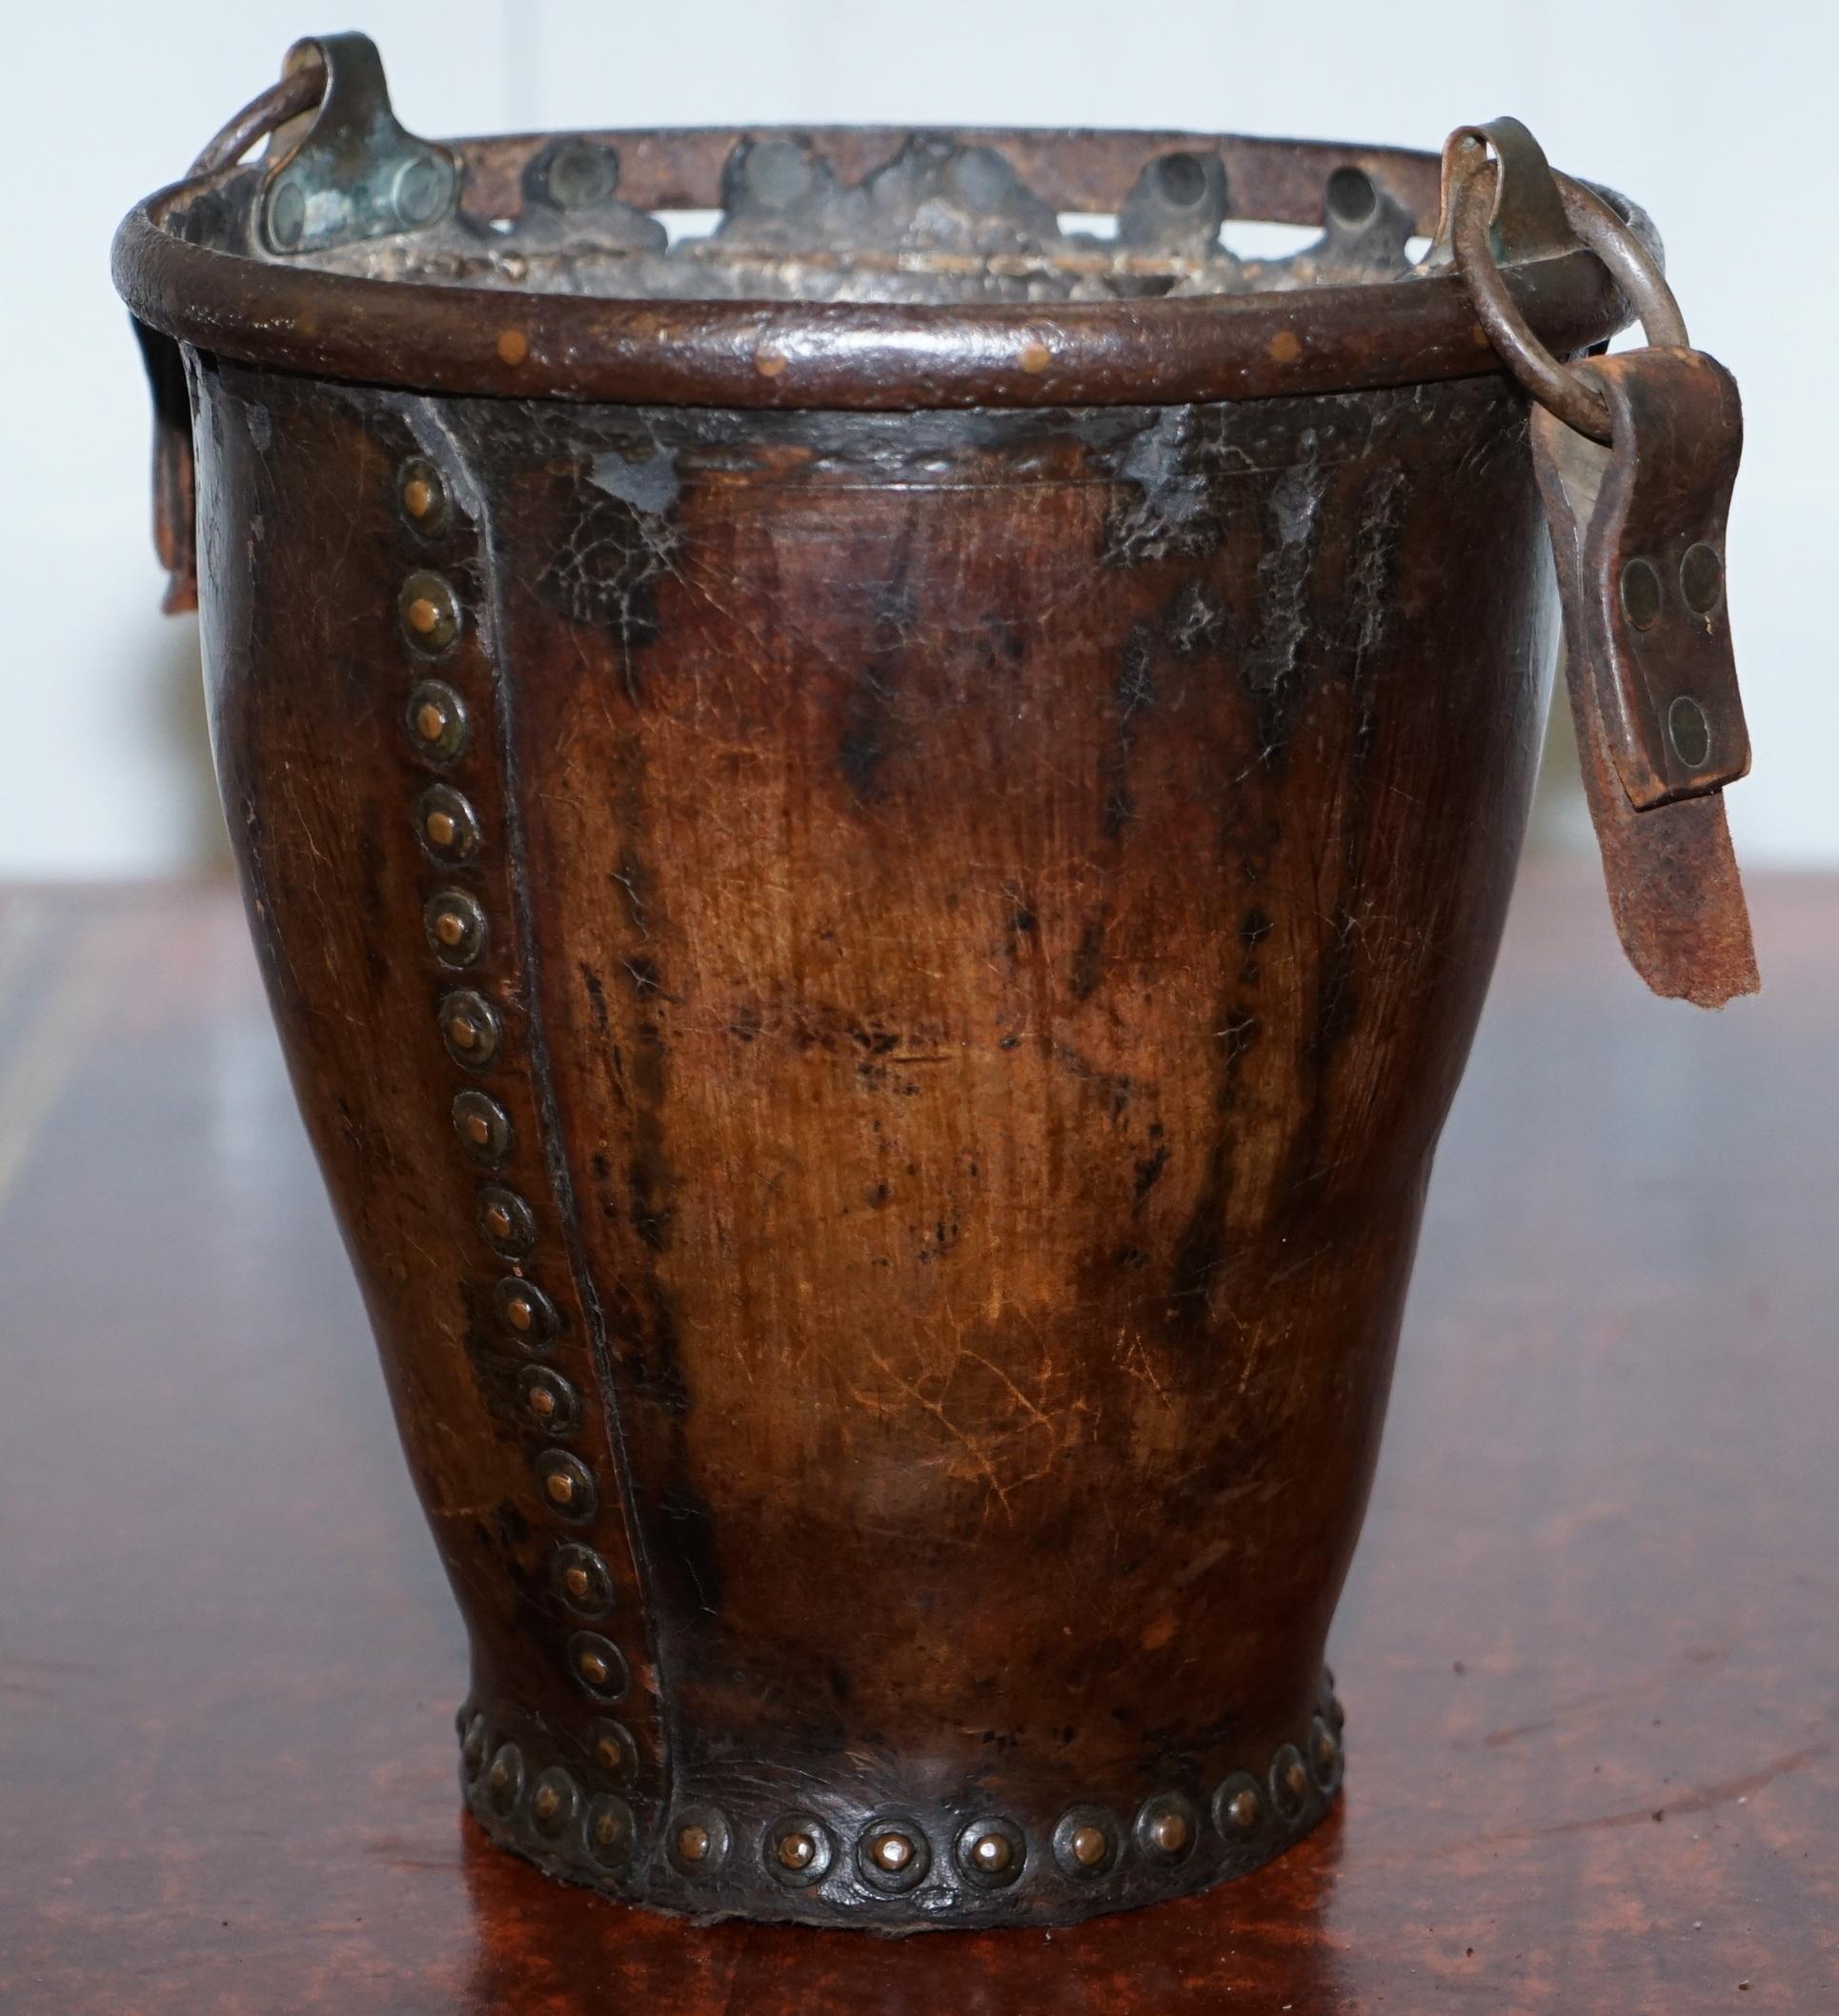 English Very Rare circa 1740 Leather and Iron Bound Fire or Pete Bucket Original Handle